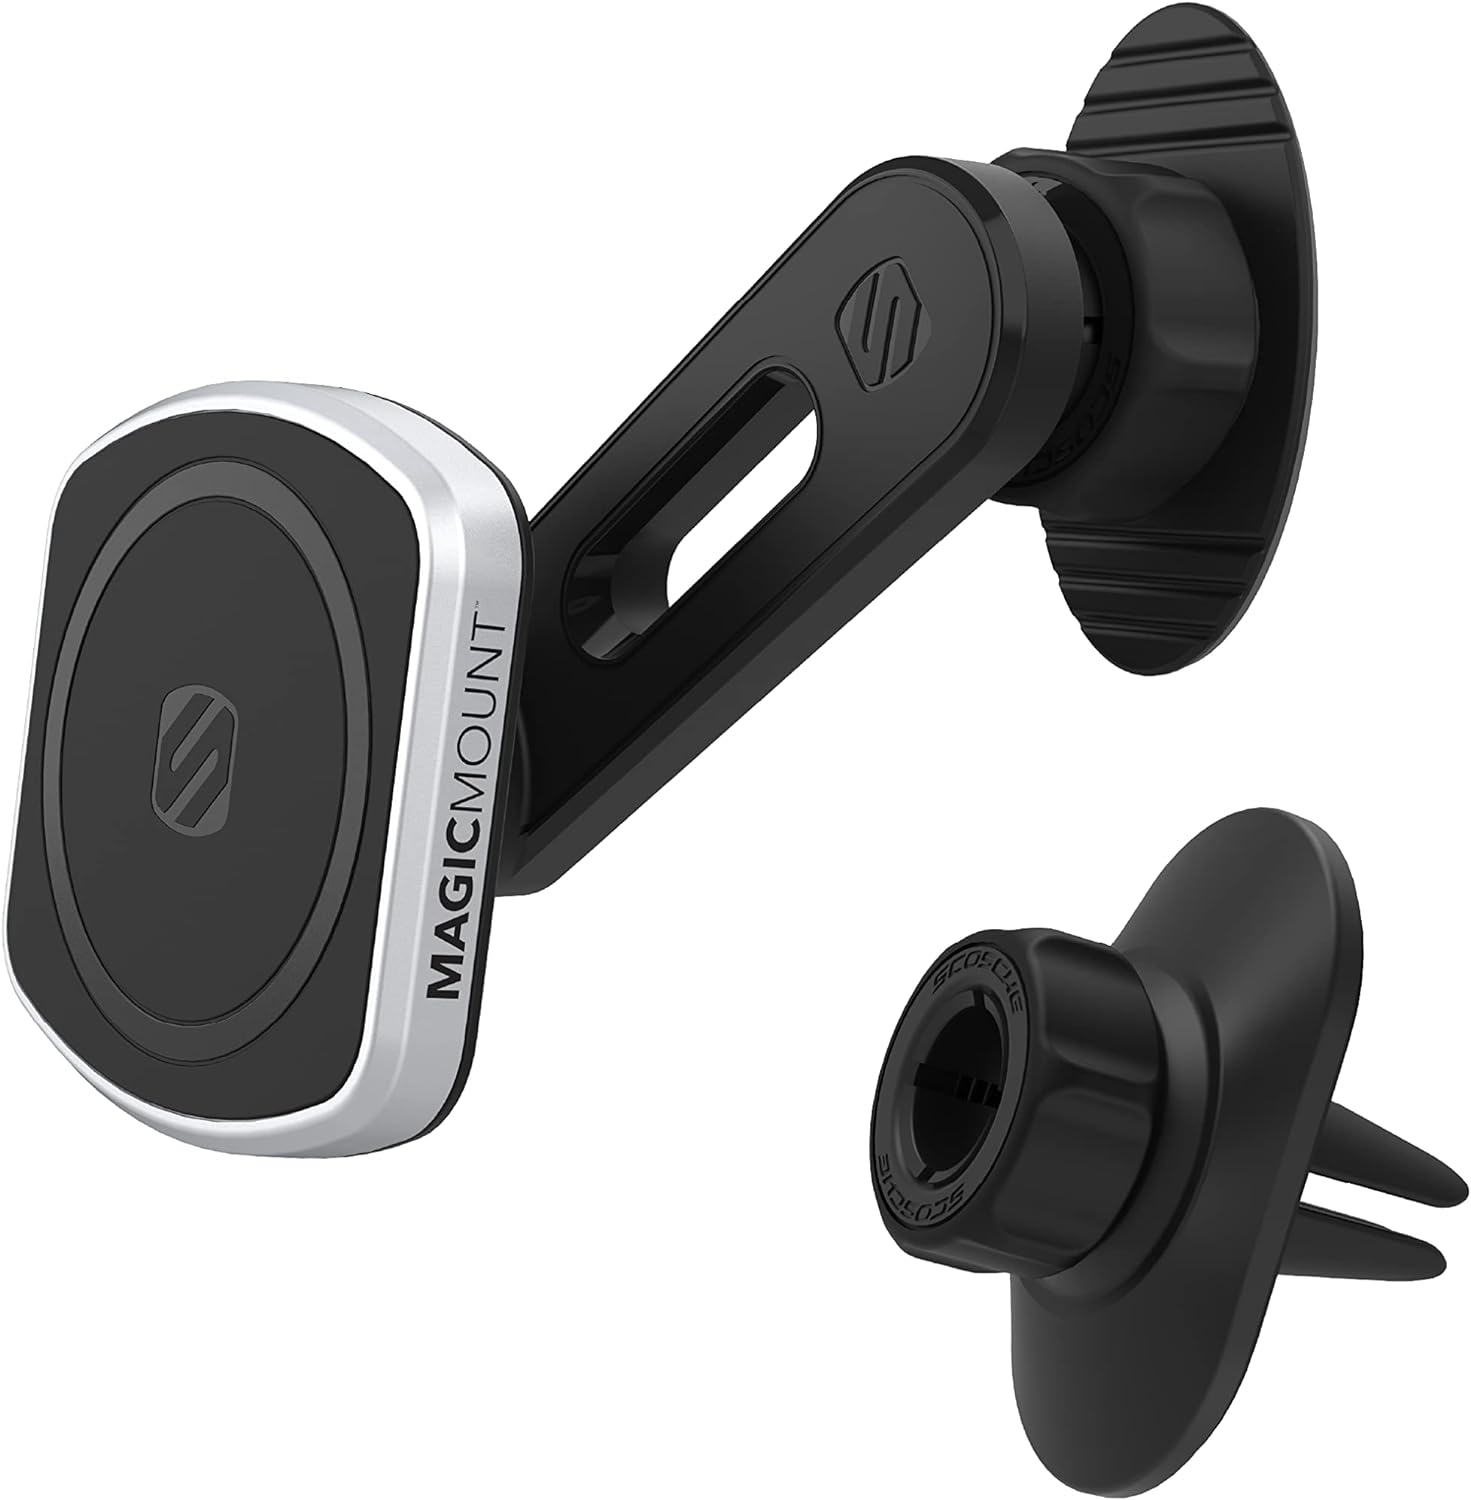 Scosche Magnetic Dash/Vent Mount For Mobile